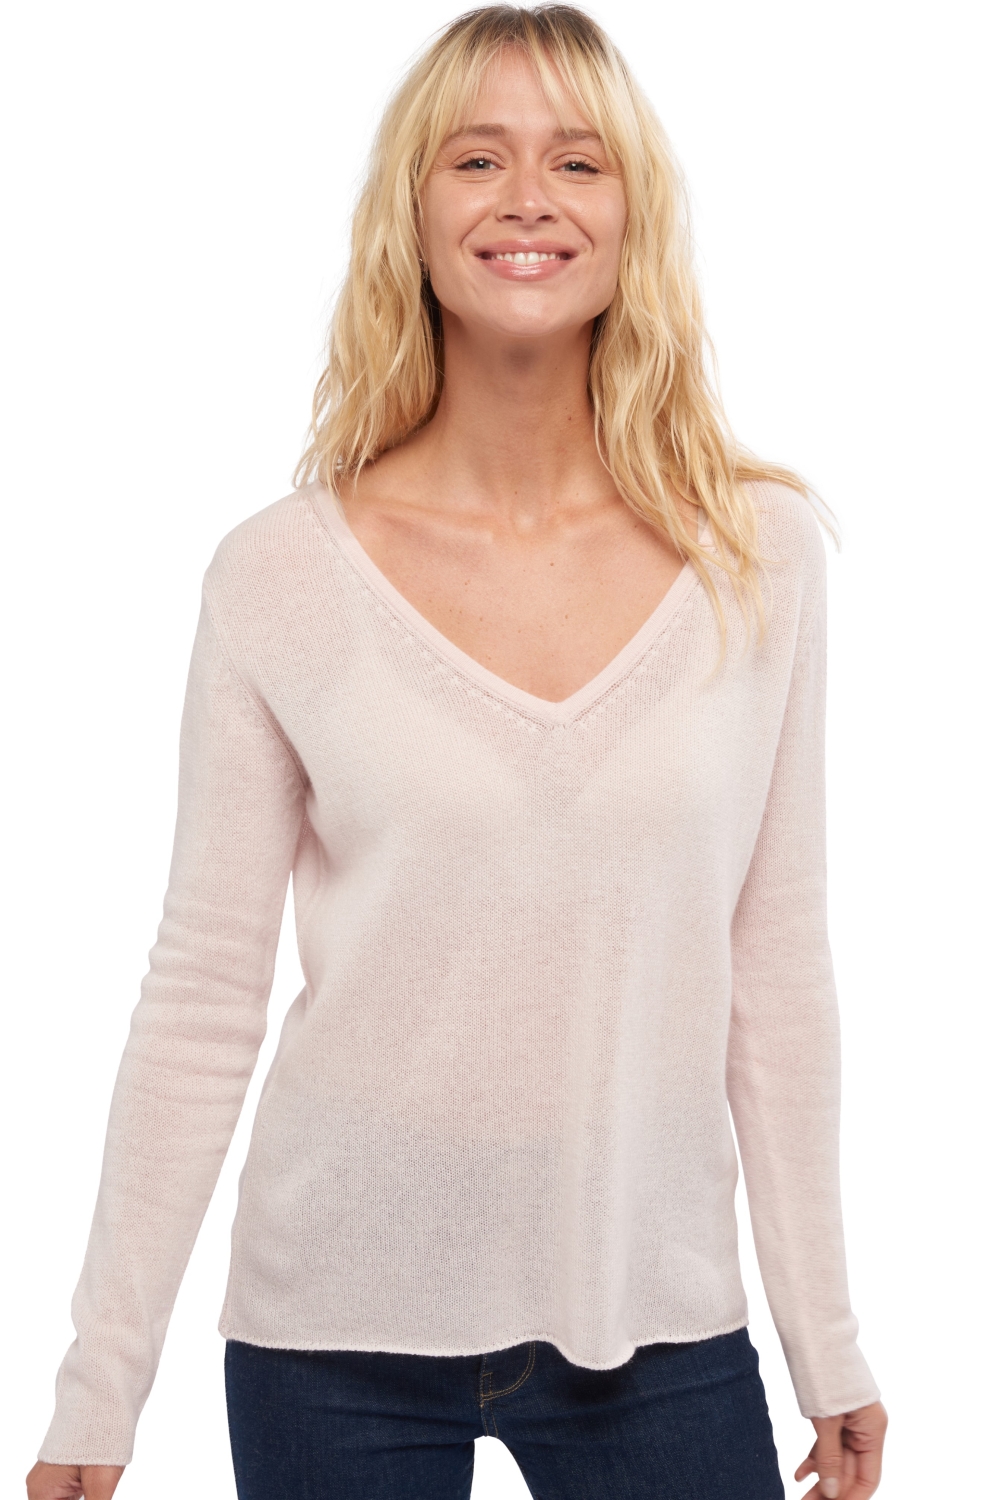 Cashmere ladies basic sweaters at low prices flavie shinking violet 2xl